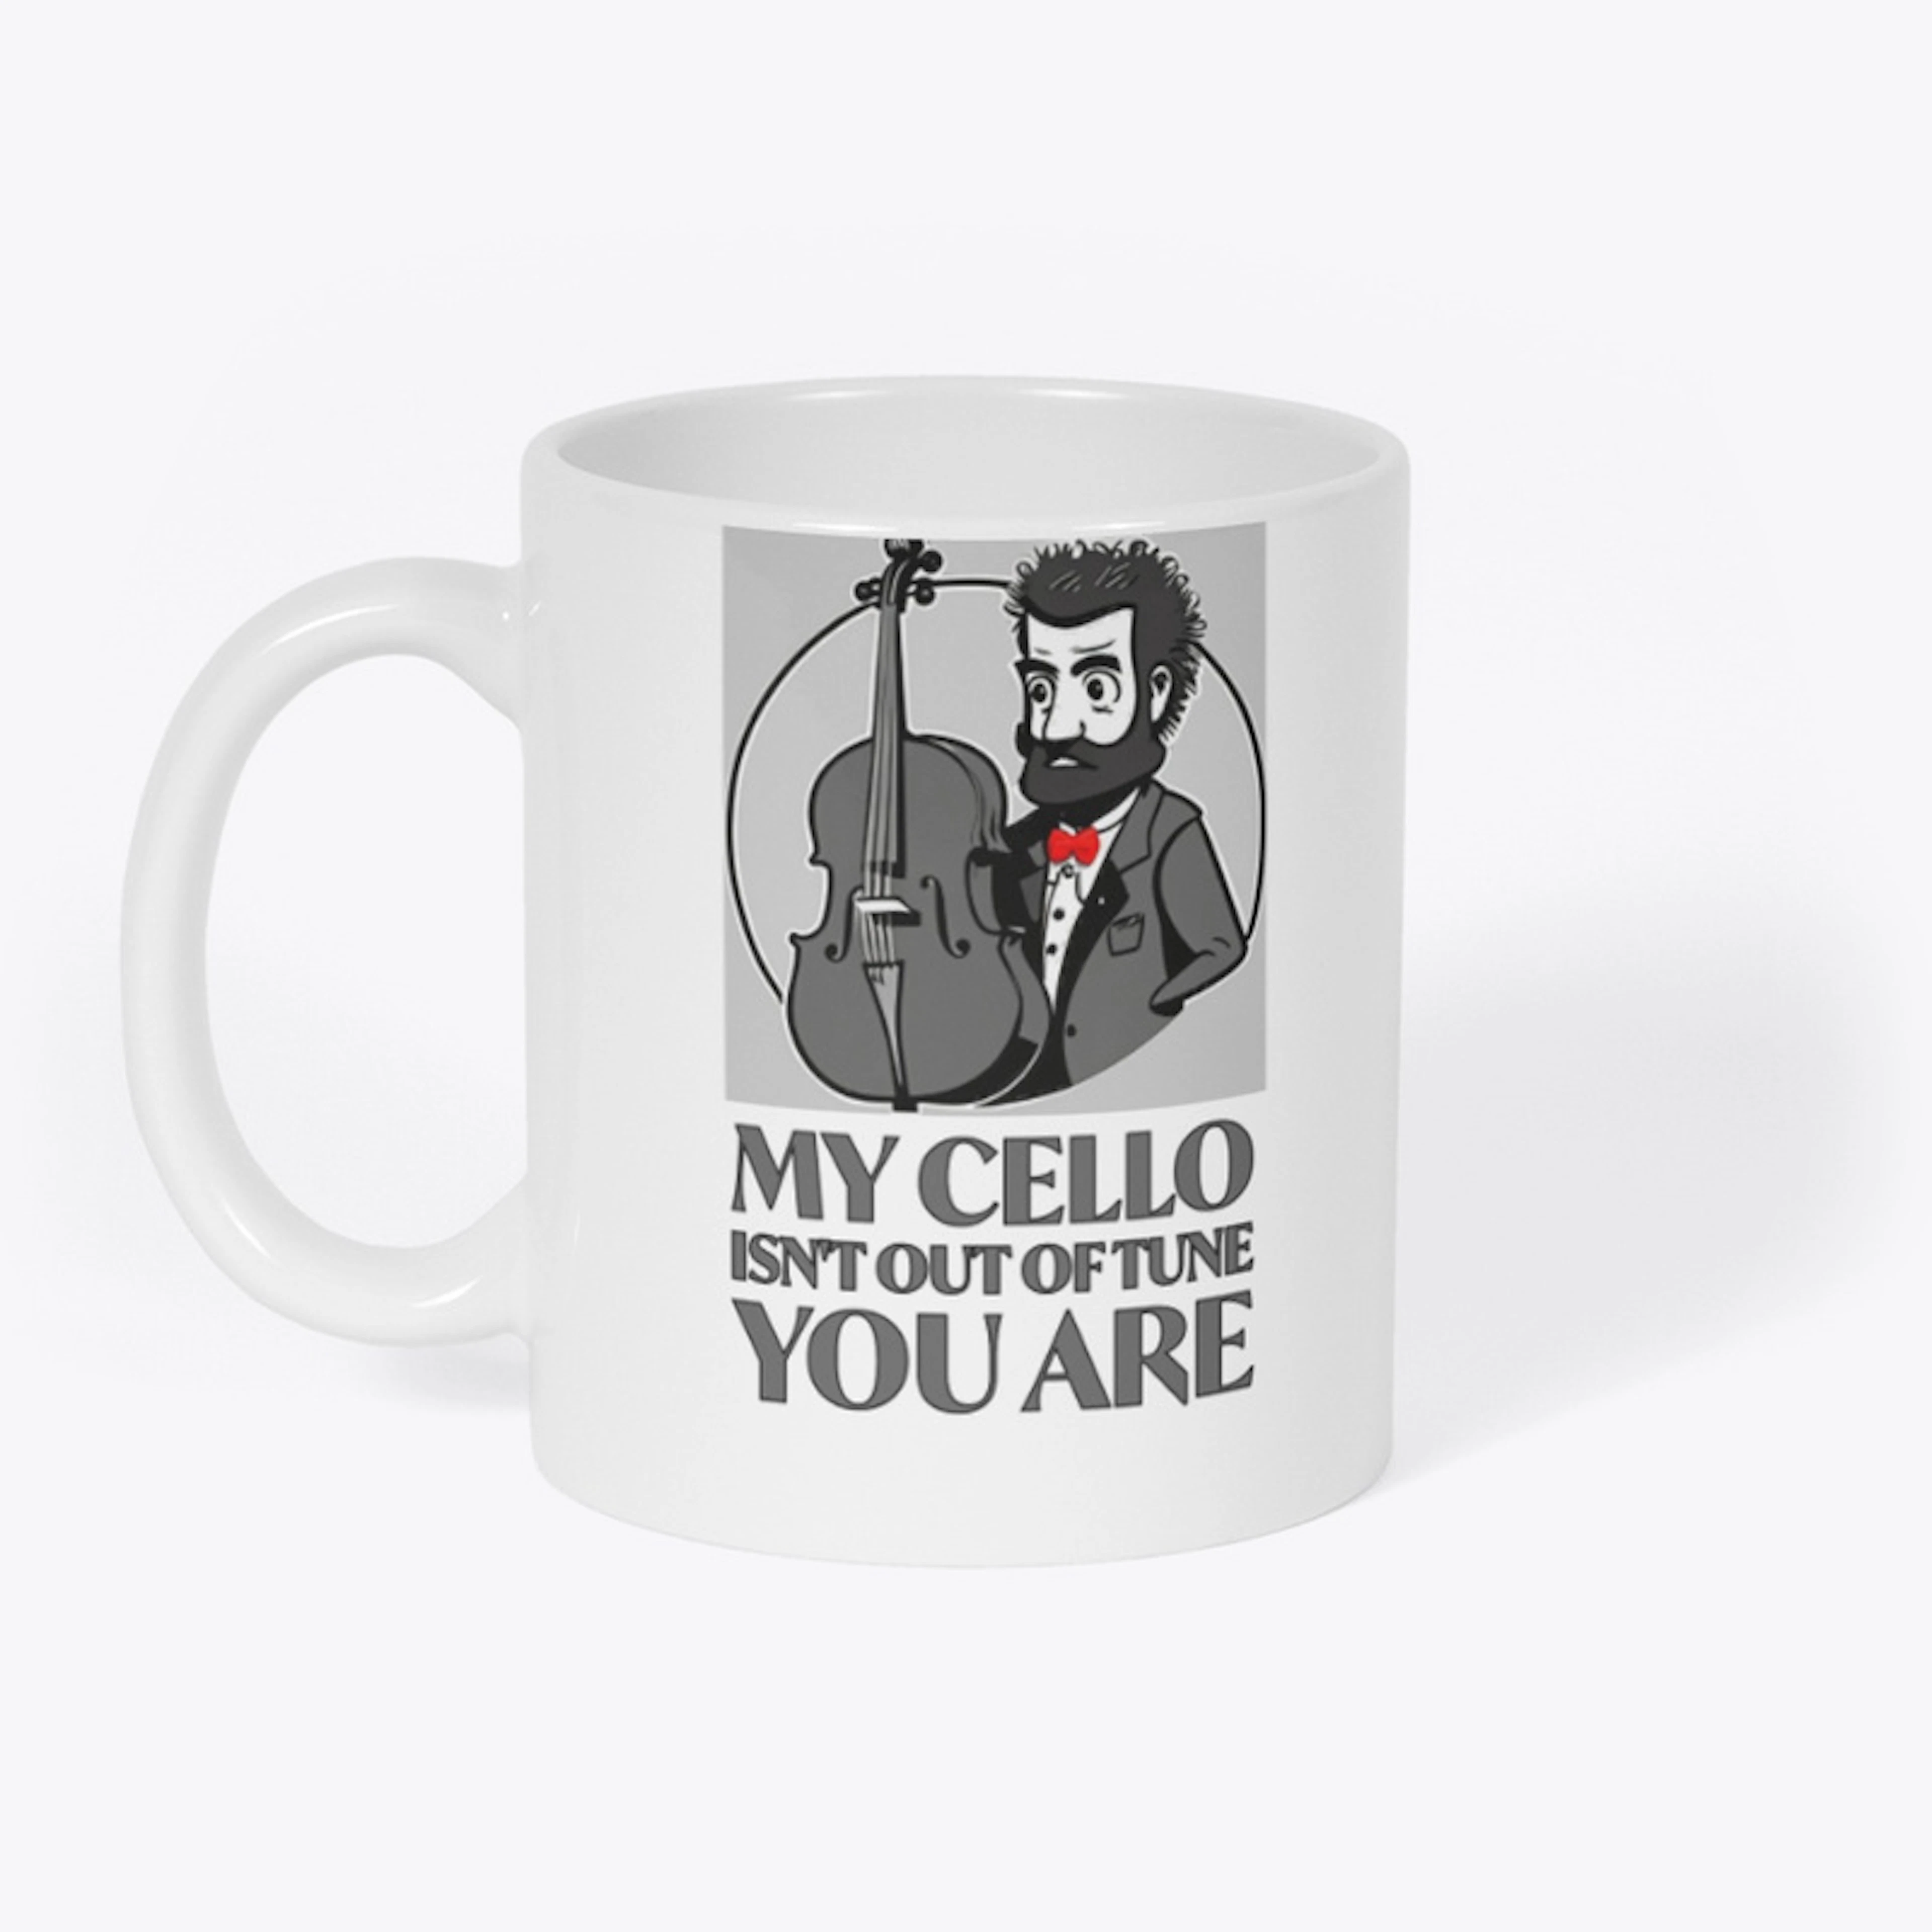 My Cello Isn't Out of Tune, You Are